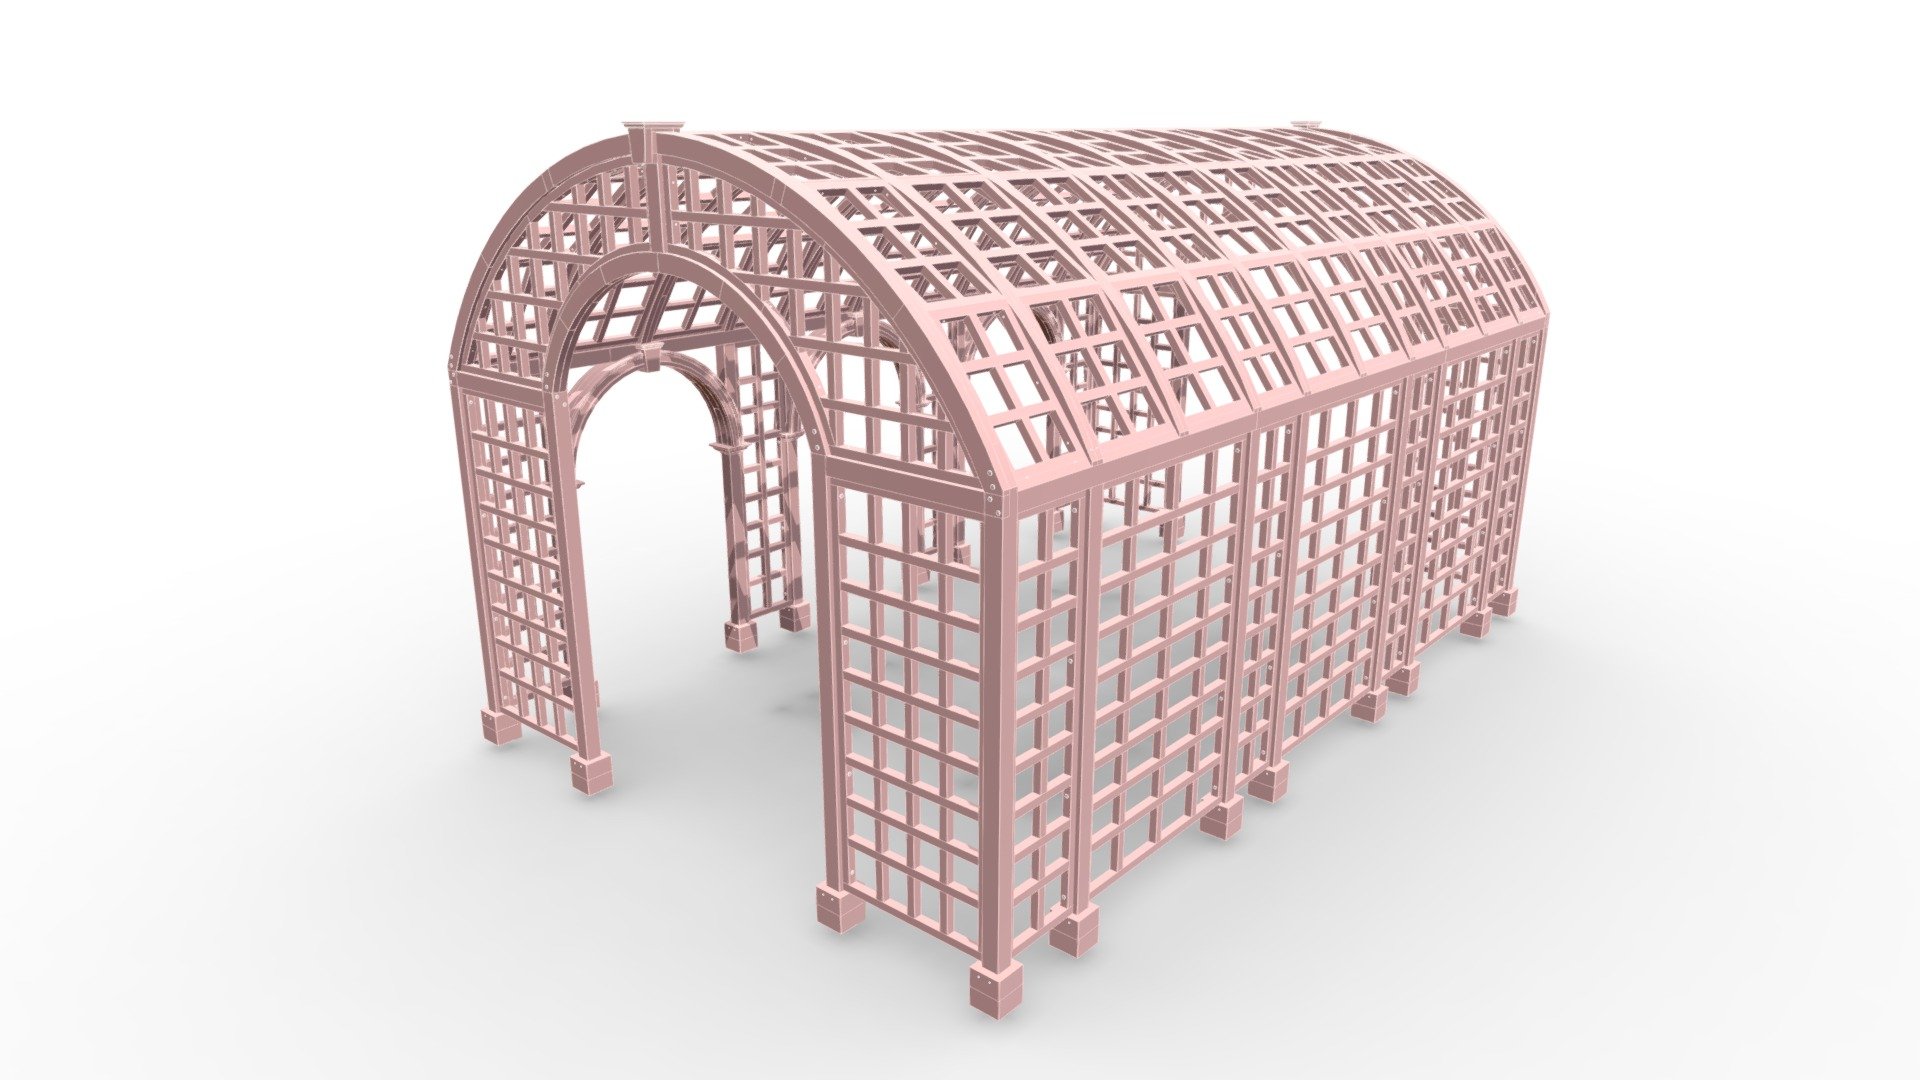 The Victorian Trellis (Options: 22' L x 14' W, Combination of Arcs and Lattice Panels, Mature Redwood, No Rain Guard, 9' Post Height, No Electrical Wiring Trim, 4-Post Anchor Kit for Stone, No Ceiling Fan Base, Transparent Premium Sealant) 3d model